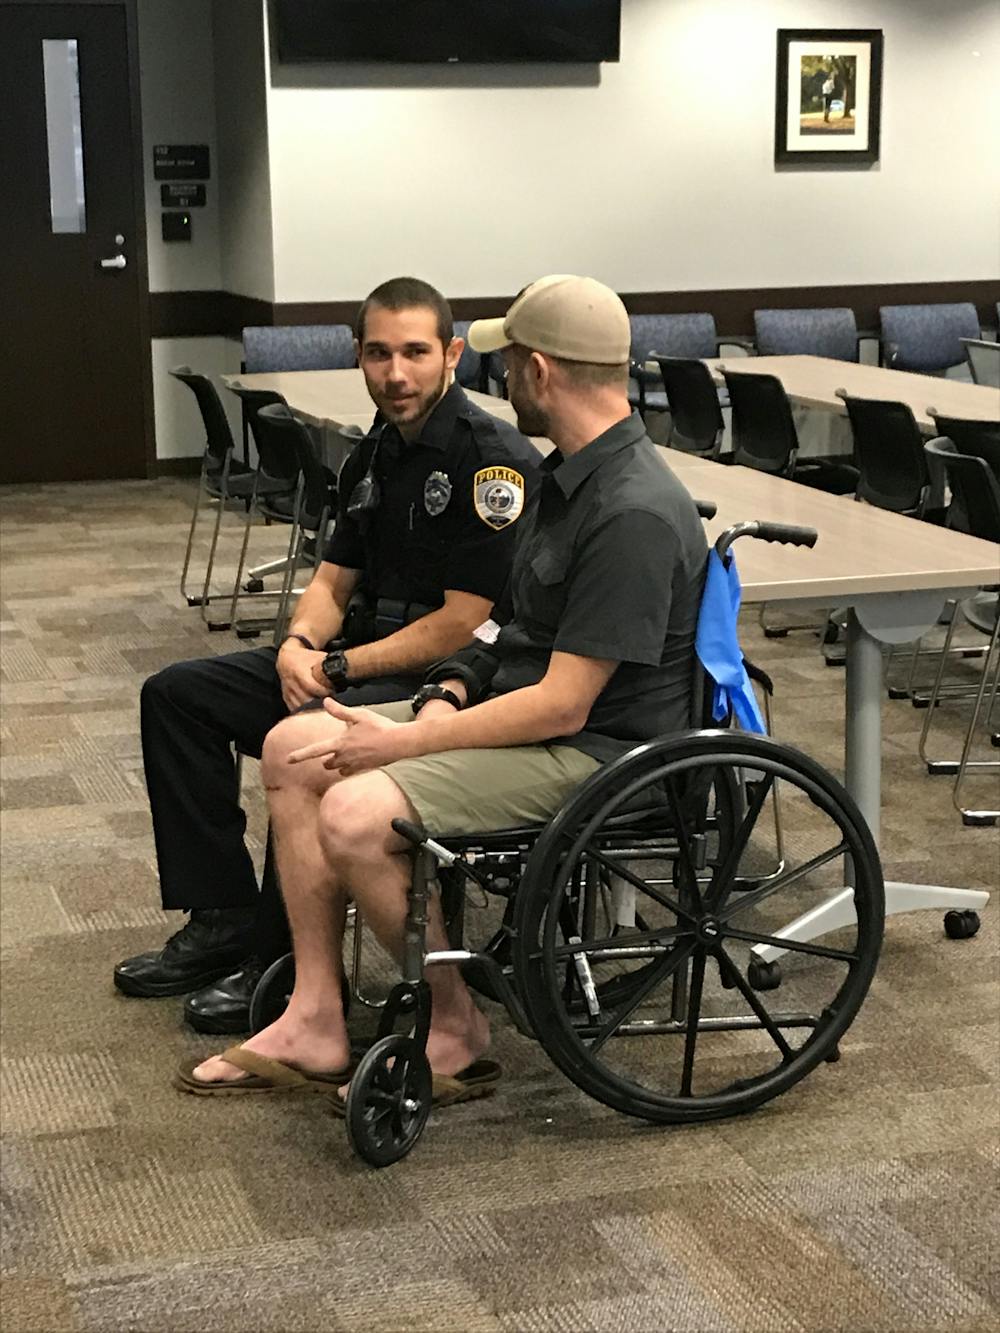 <p dir="ltr"><span>Joshua Roe, a 36-year-old UF doctoral student, and Gainesville Police officer Jack Salafrio meet on Thursday for the first time after Salafrio responded to a crash on Jan. 6 and rescued Roe. Roe was run over by his own car, which was stolen, police said.</span></p><p><span> </span></p>